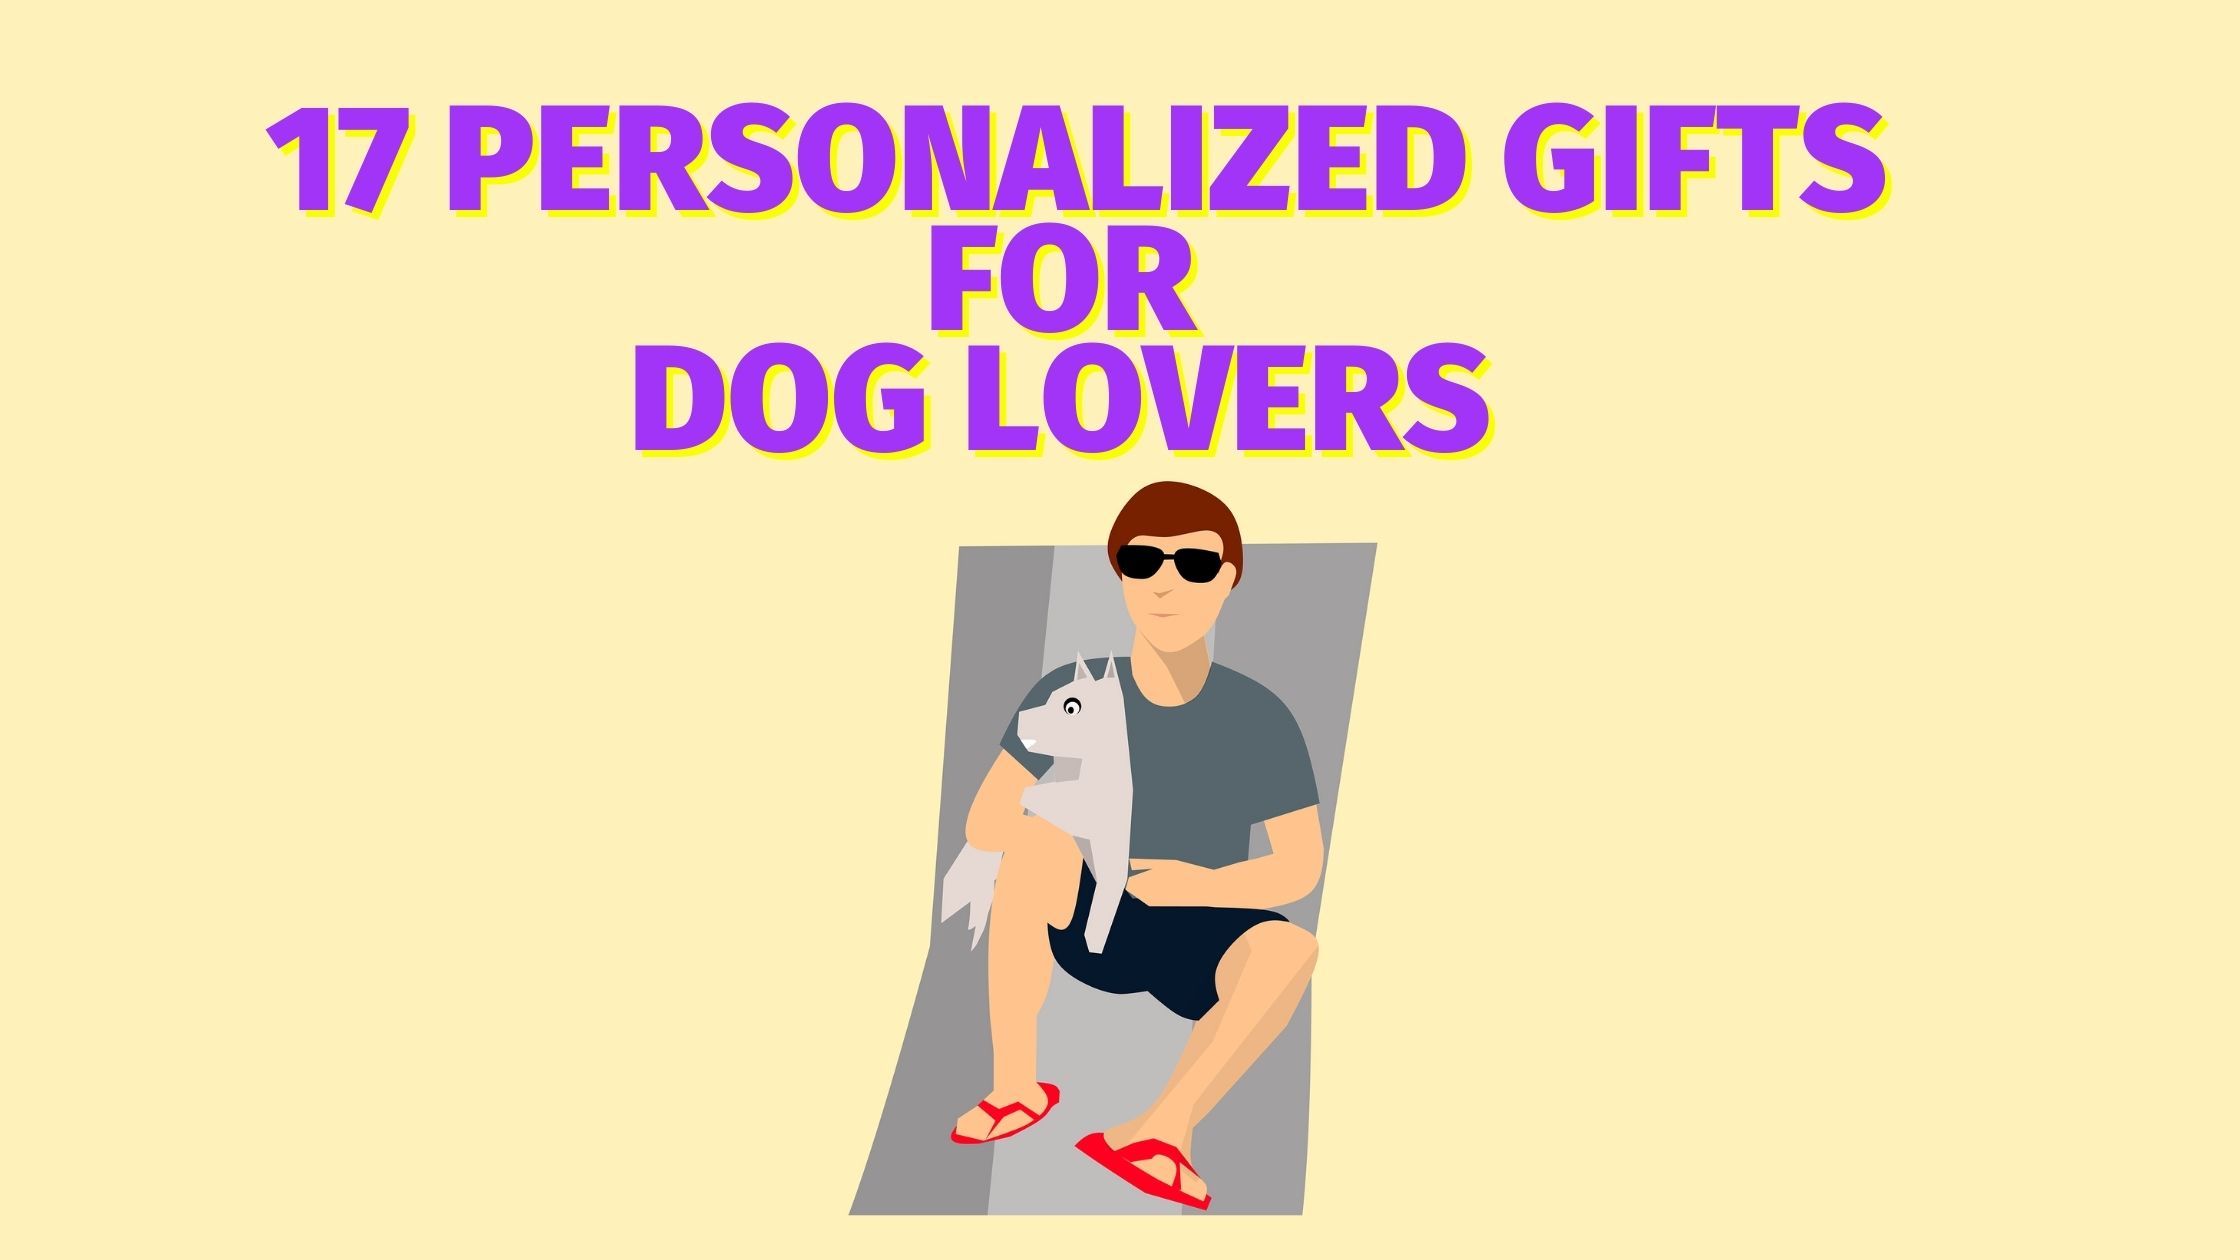 17 Personalized Gifts for Dog Lovers They'll truly Appreciate